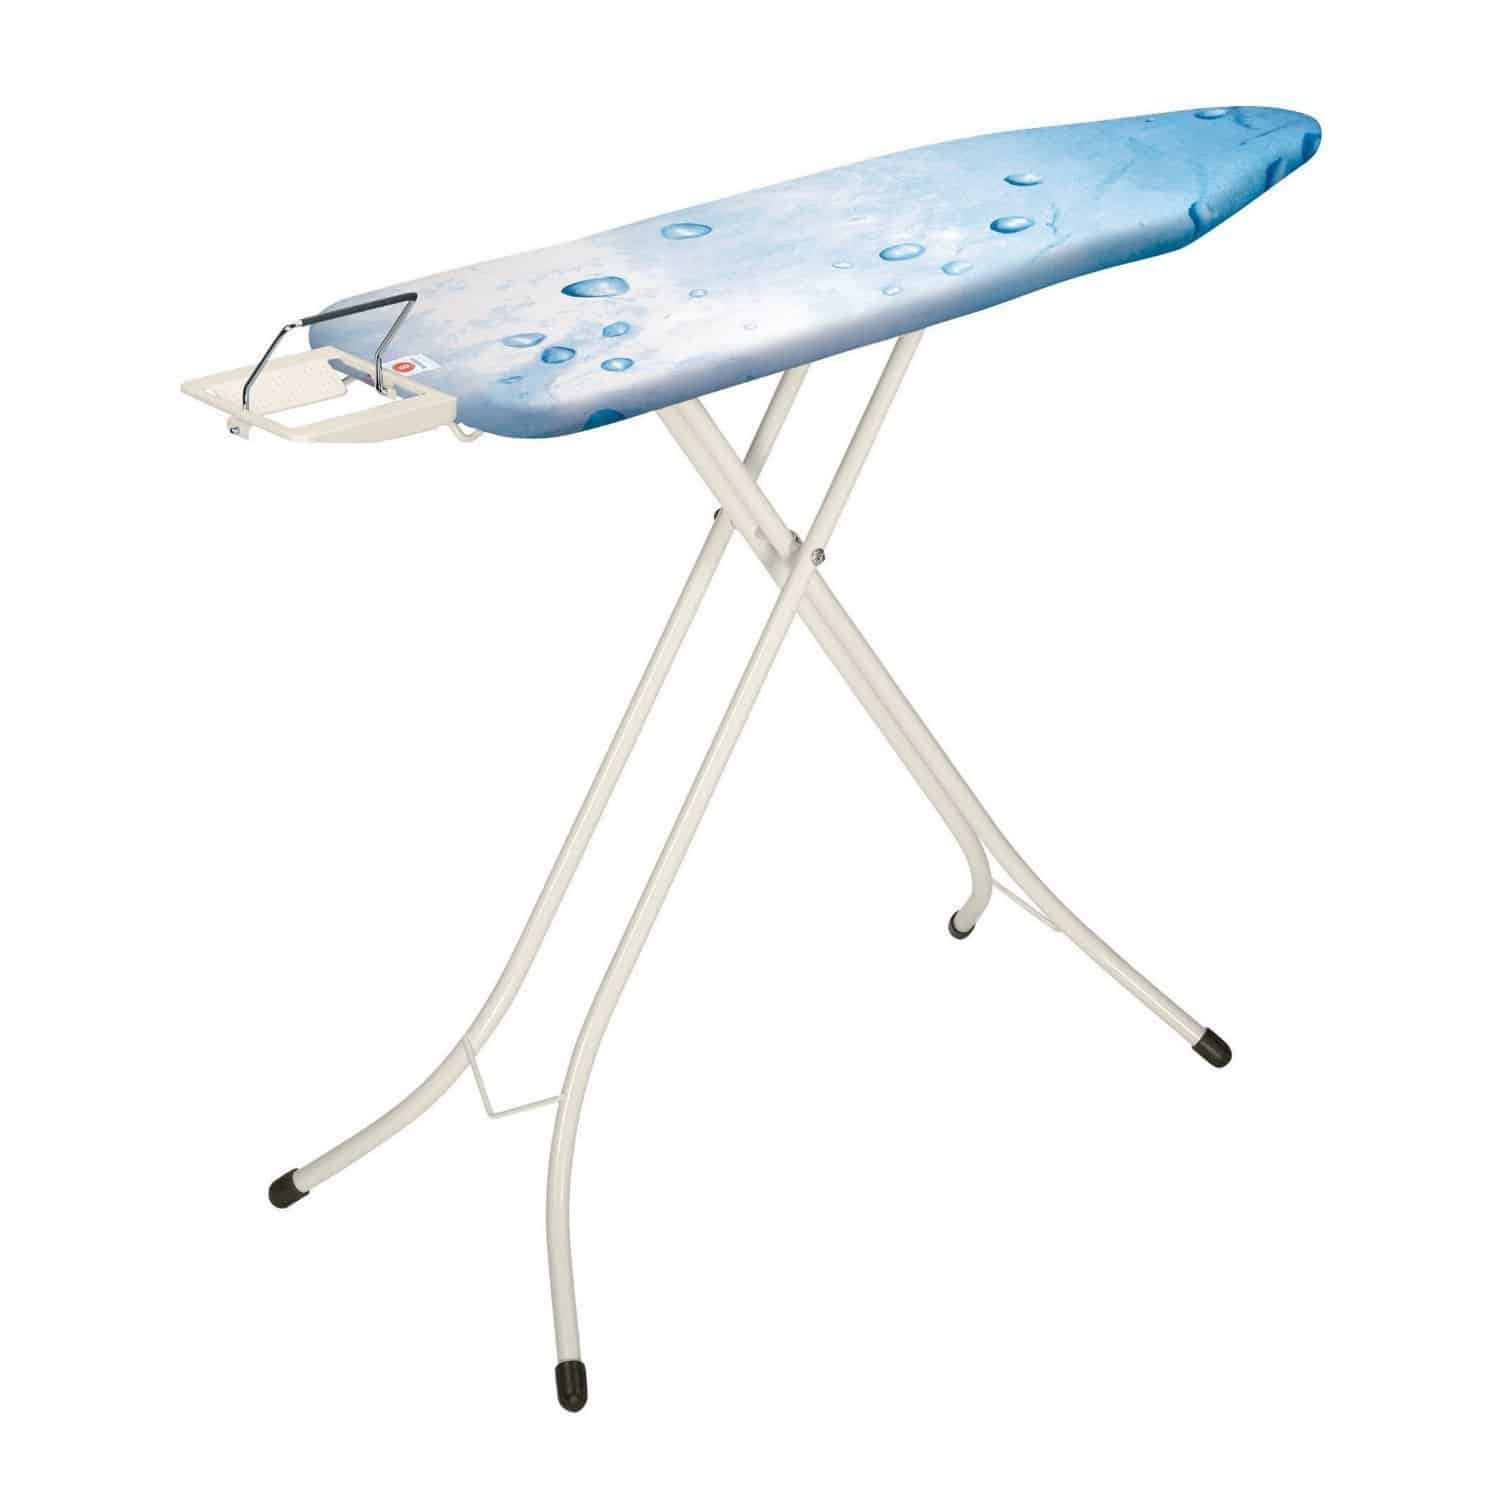 Top 10 Best Ironing Boards in 2020